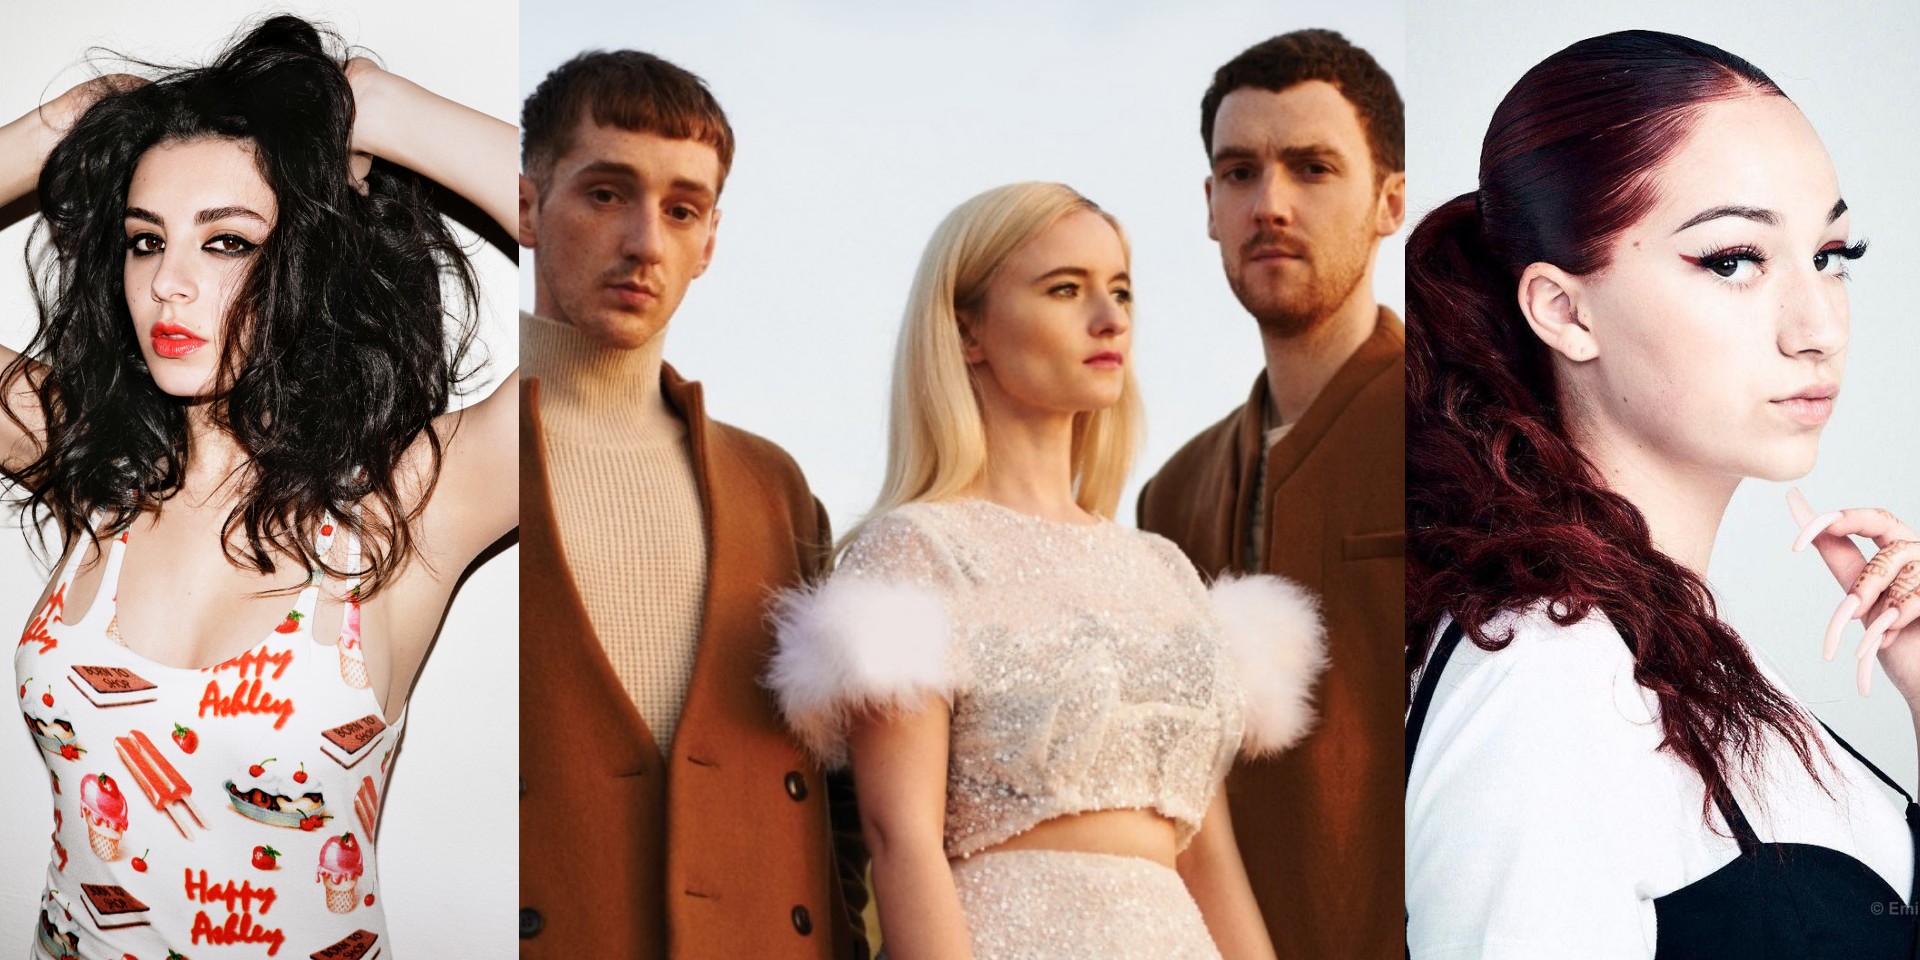 Clean Bandit releases invigorating new track with the help of Charli XCX and Bhad Babie - listen